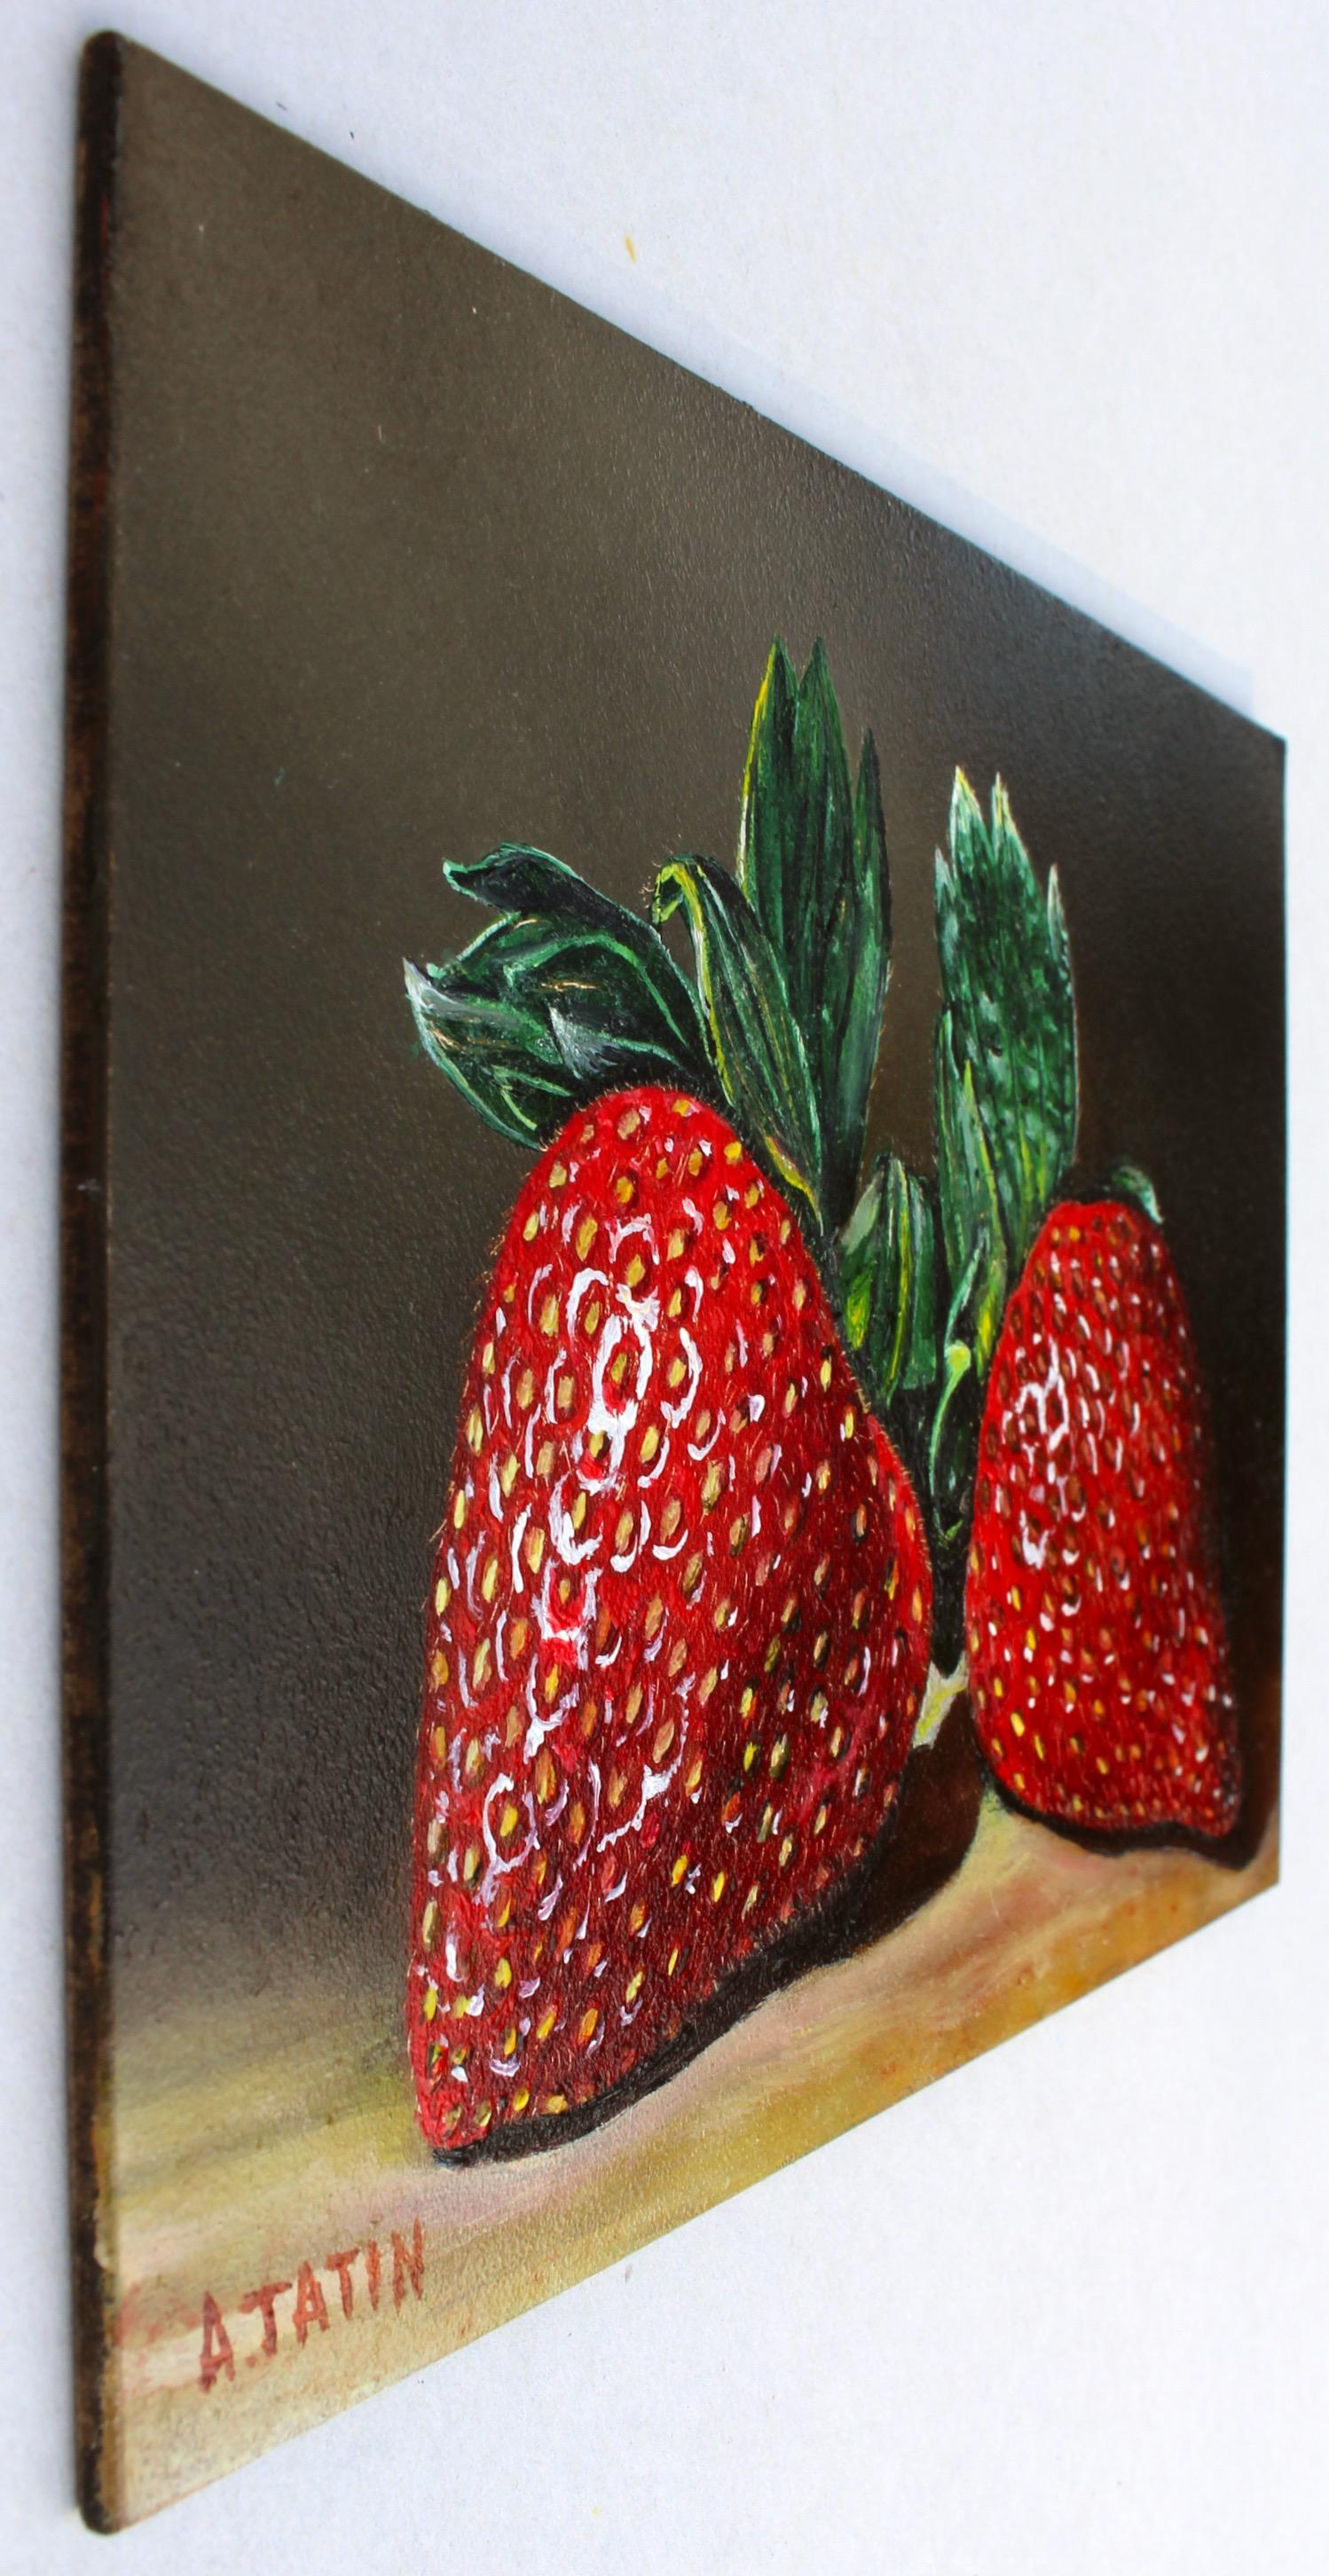 Two Strawberries, Oil Painting - Contemporary Art by Art Tatin